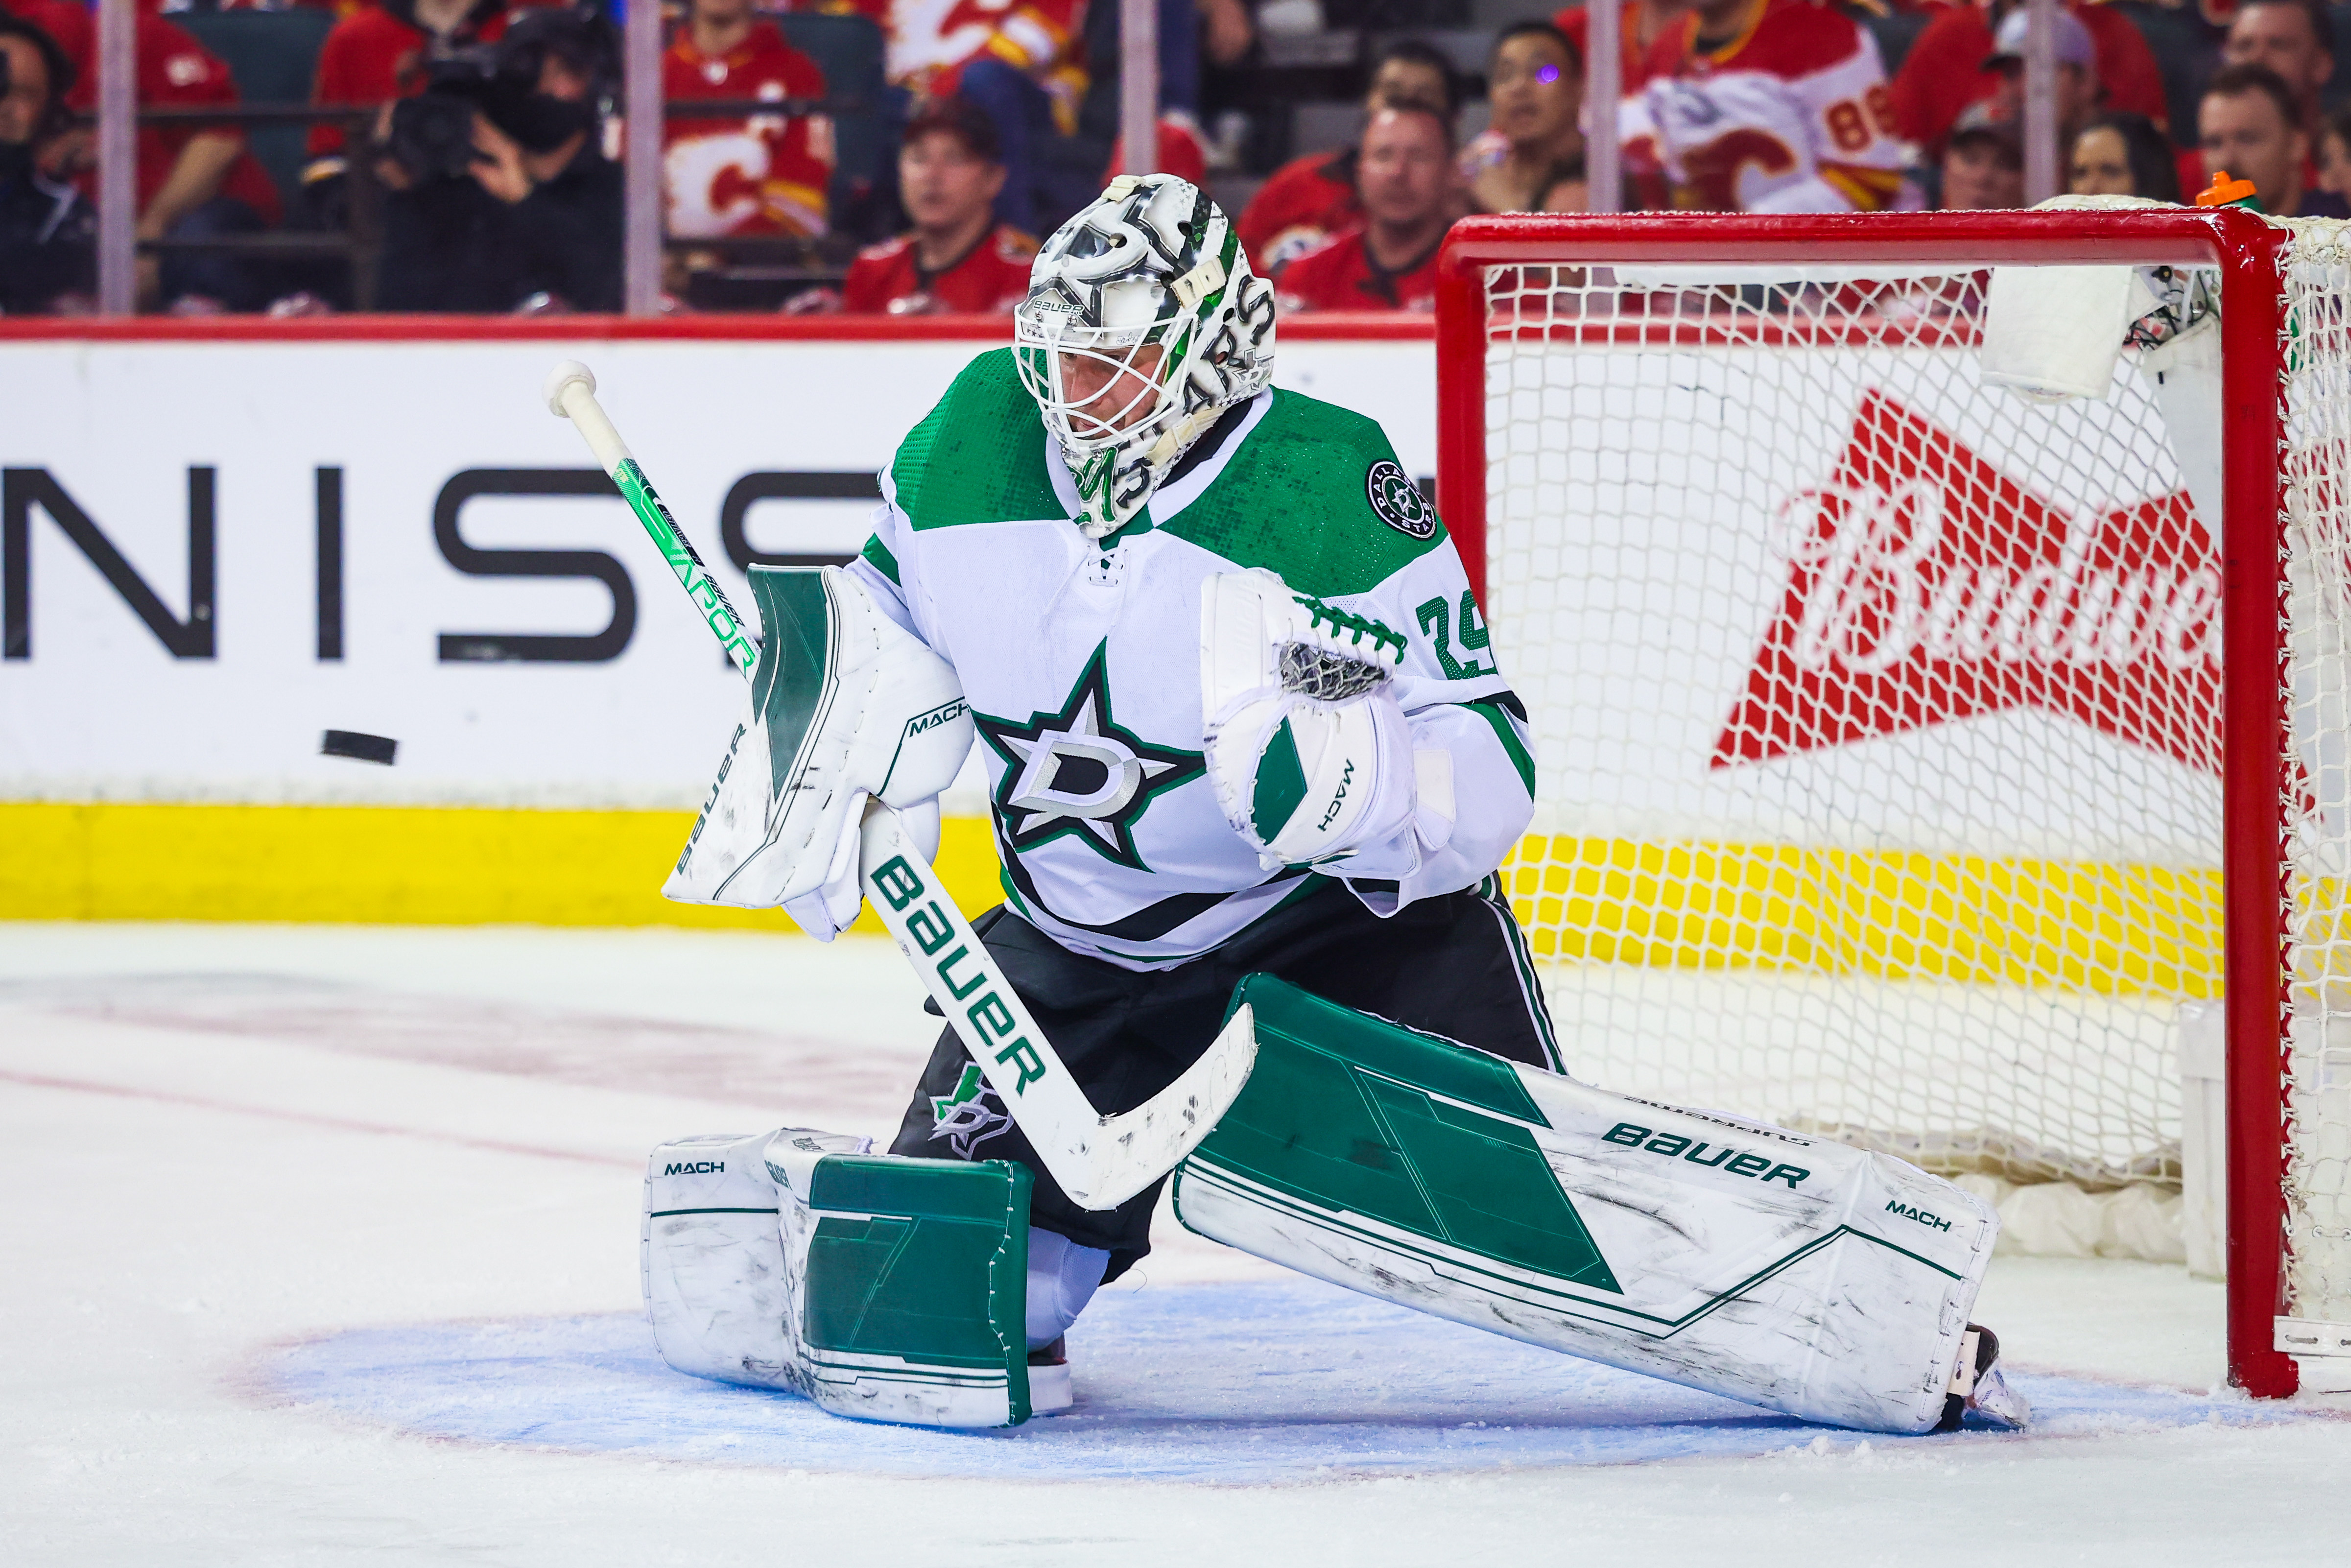 NHL: Stanley Cup Playoffs-Dallas Stars at Calgary Flames